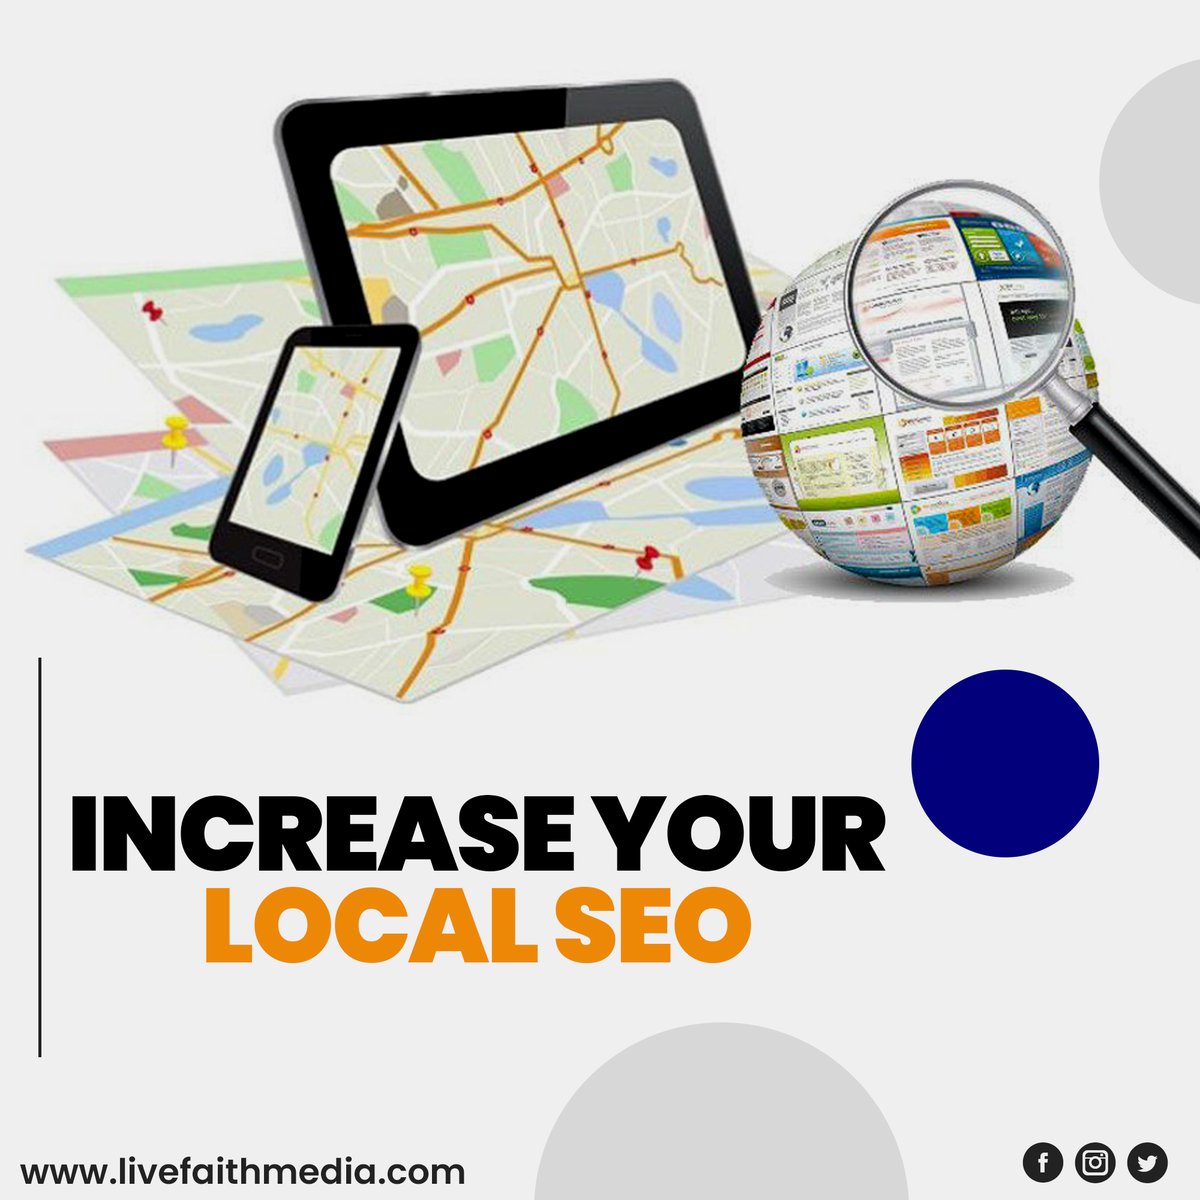 Focus on the important factors of local SEO and rank on page one of local google searches! 
Hire us @livefaithmedia for your church or nonprofit web and digital marketing services.

#digitalmarketingagencyonline #seo #localseo #gamechanger #seotips #seoservices #seomarketing